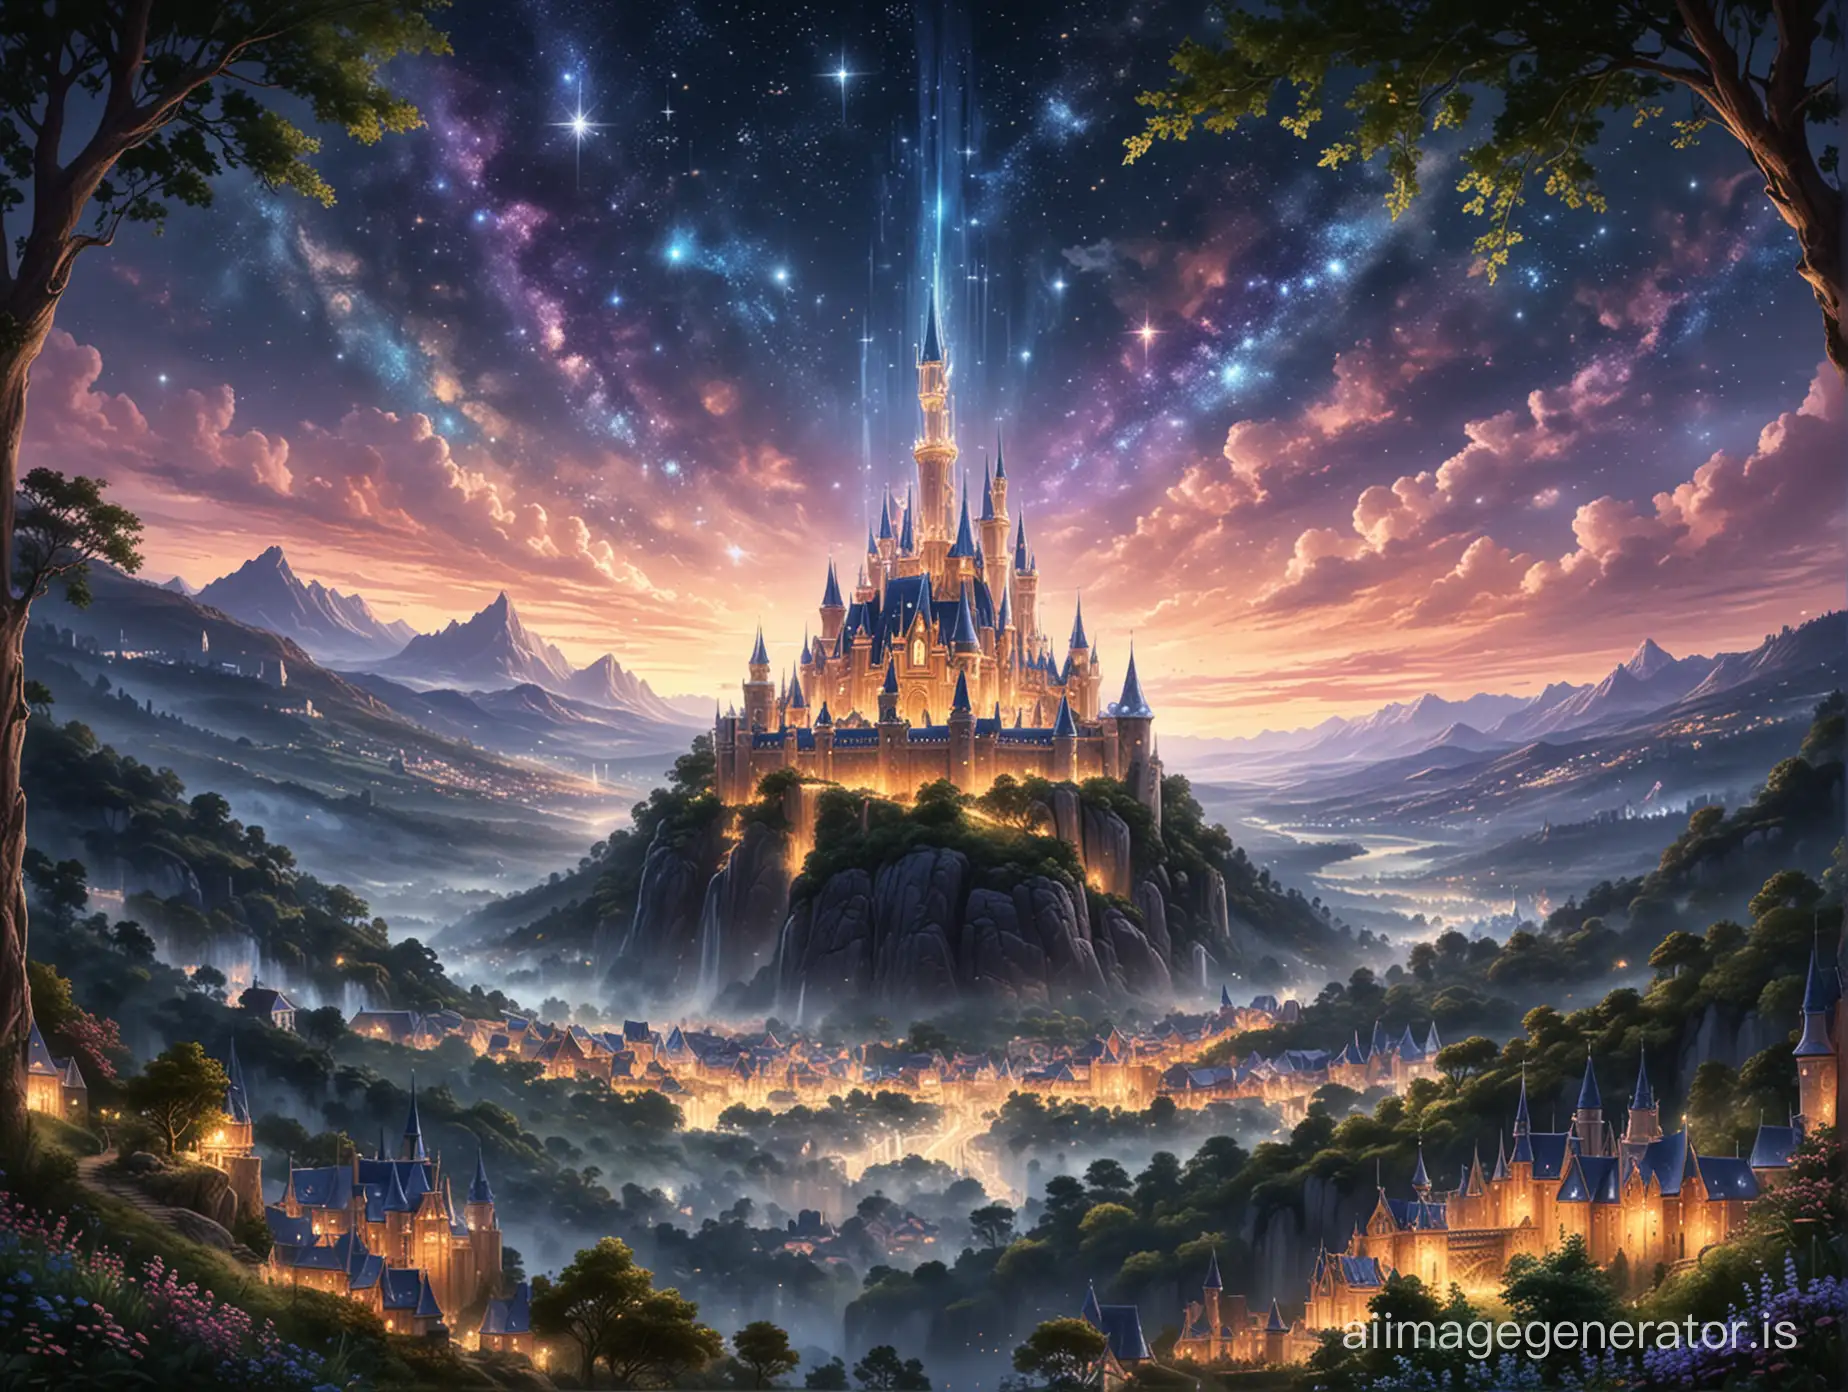 We open to a sprawling kingdom nestled beneath a canopy of twinkling stars. Towers of shimmering crystal rise high above the lush landscape, casting a soft glow upon the kingdom